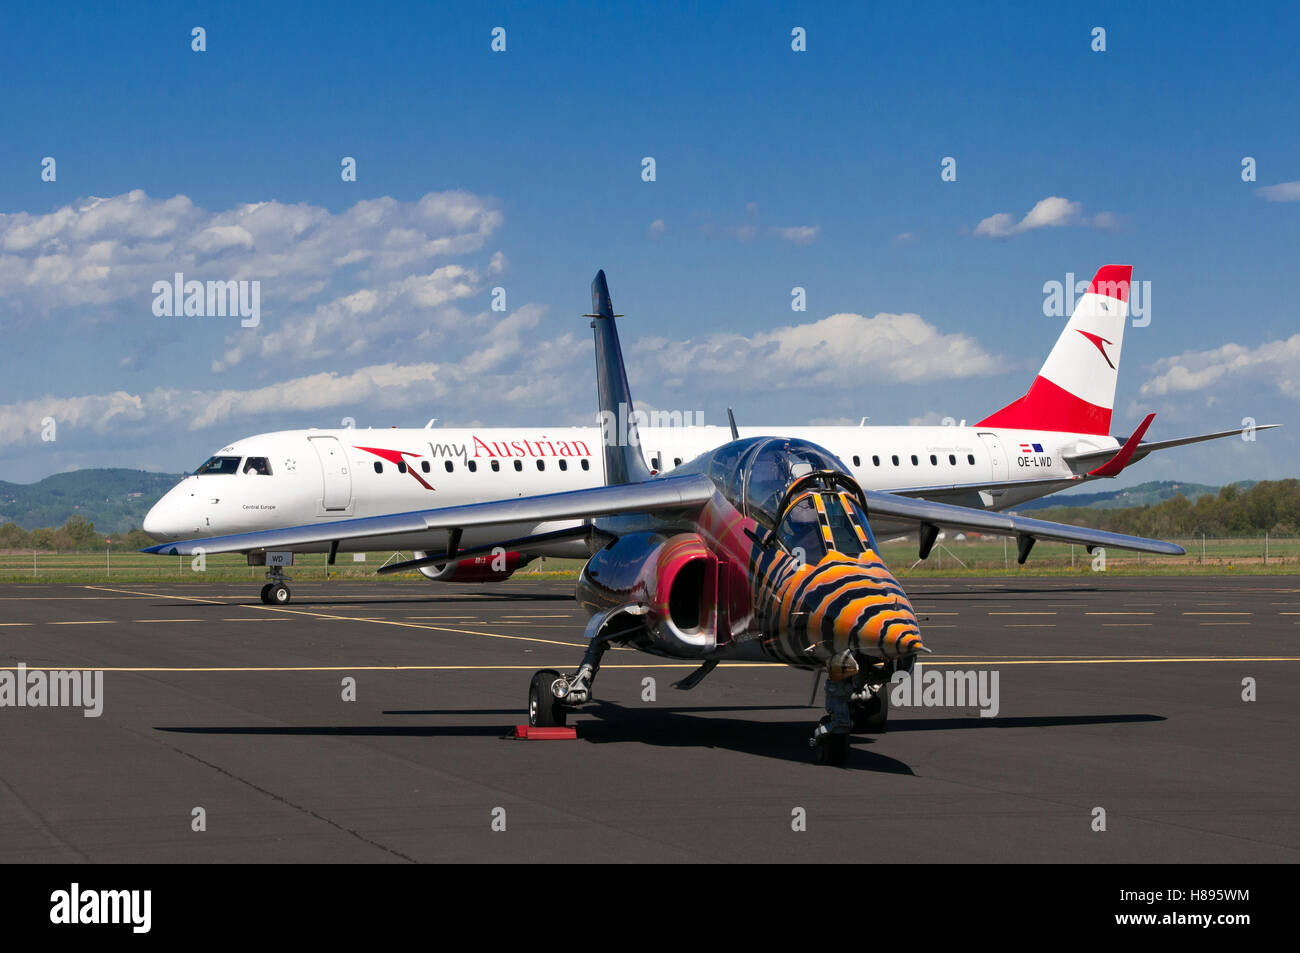 Maribor, Slovenia - April 16, 2016: Red Bull Alpha Jet in front and Austrian Airlines Embraer OE-LWD on apron at Maribor airport Stock Photo